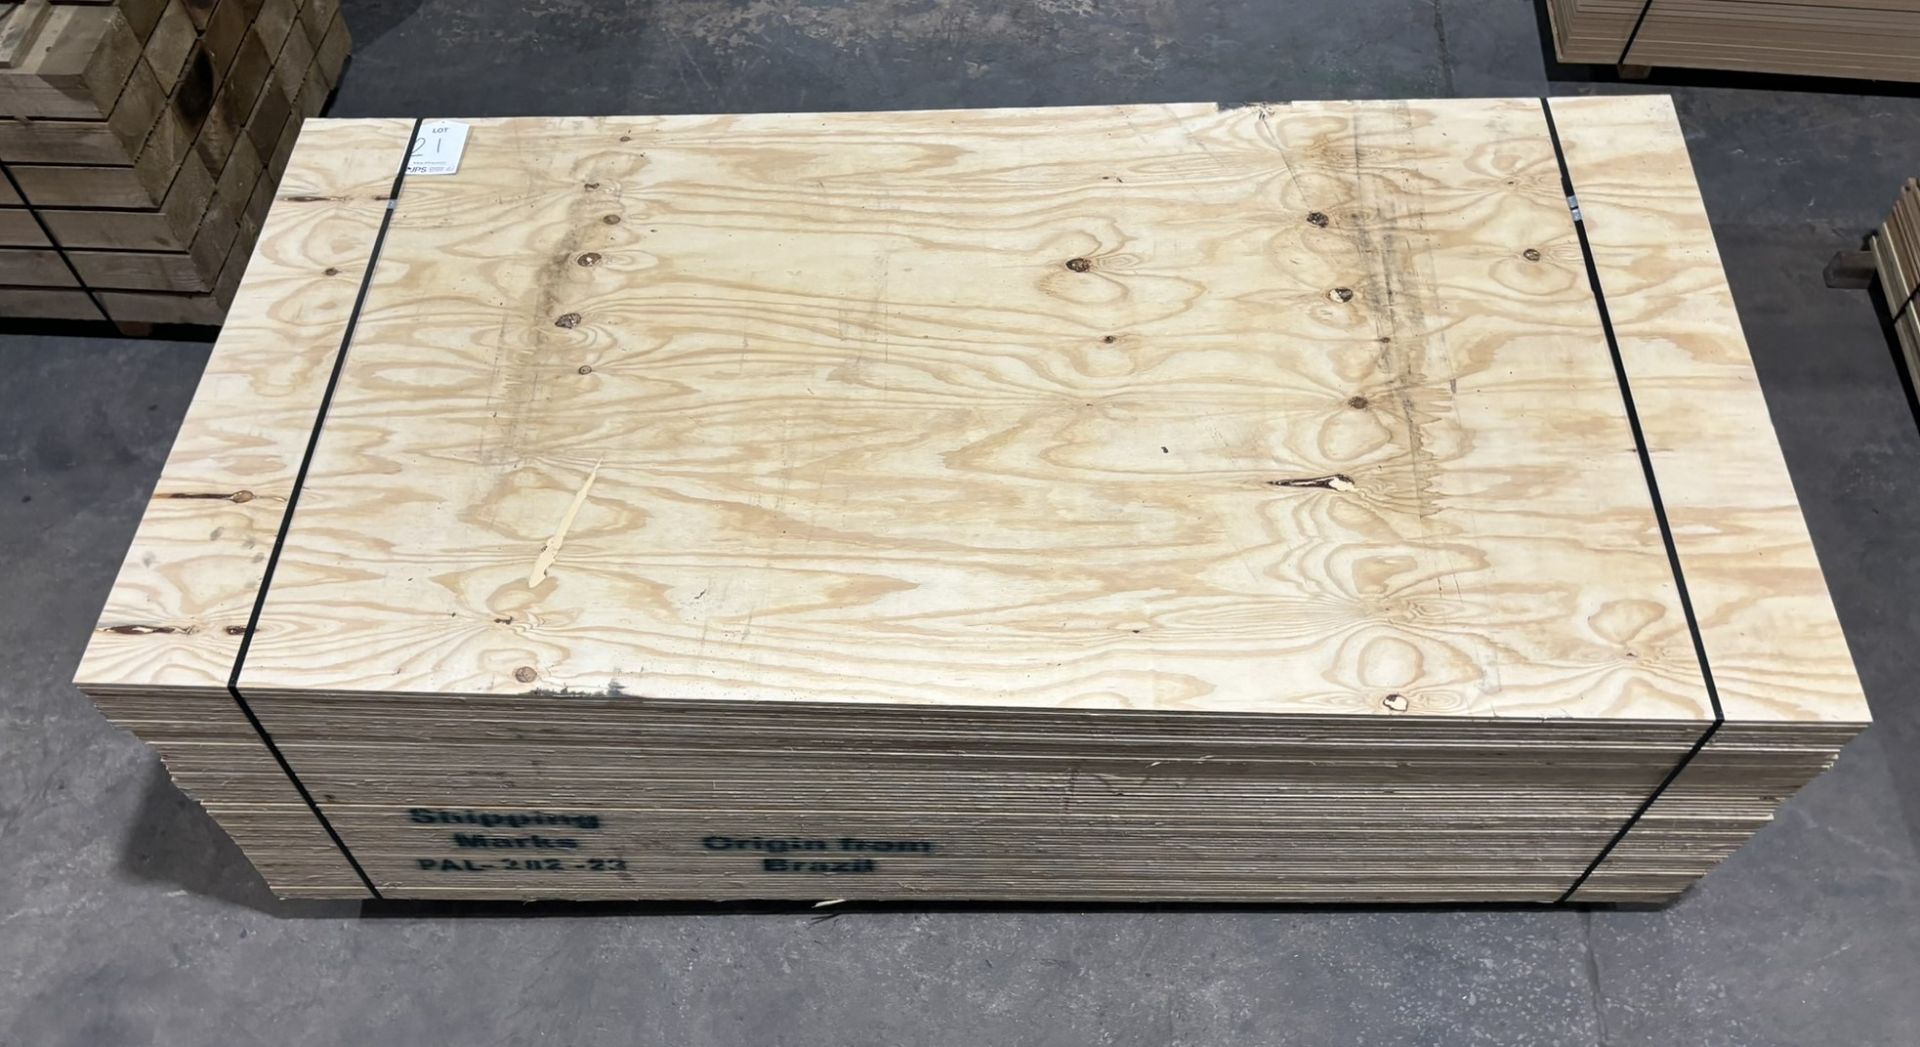 60 x Sheets Of Plywood | Size: 244cm x 122cm x 1cm - Image 2 of 7